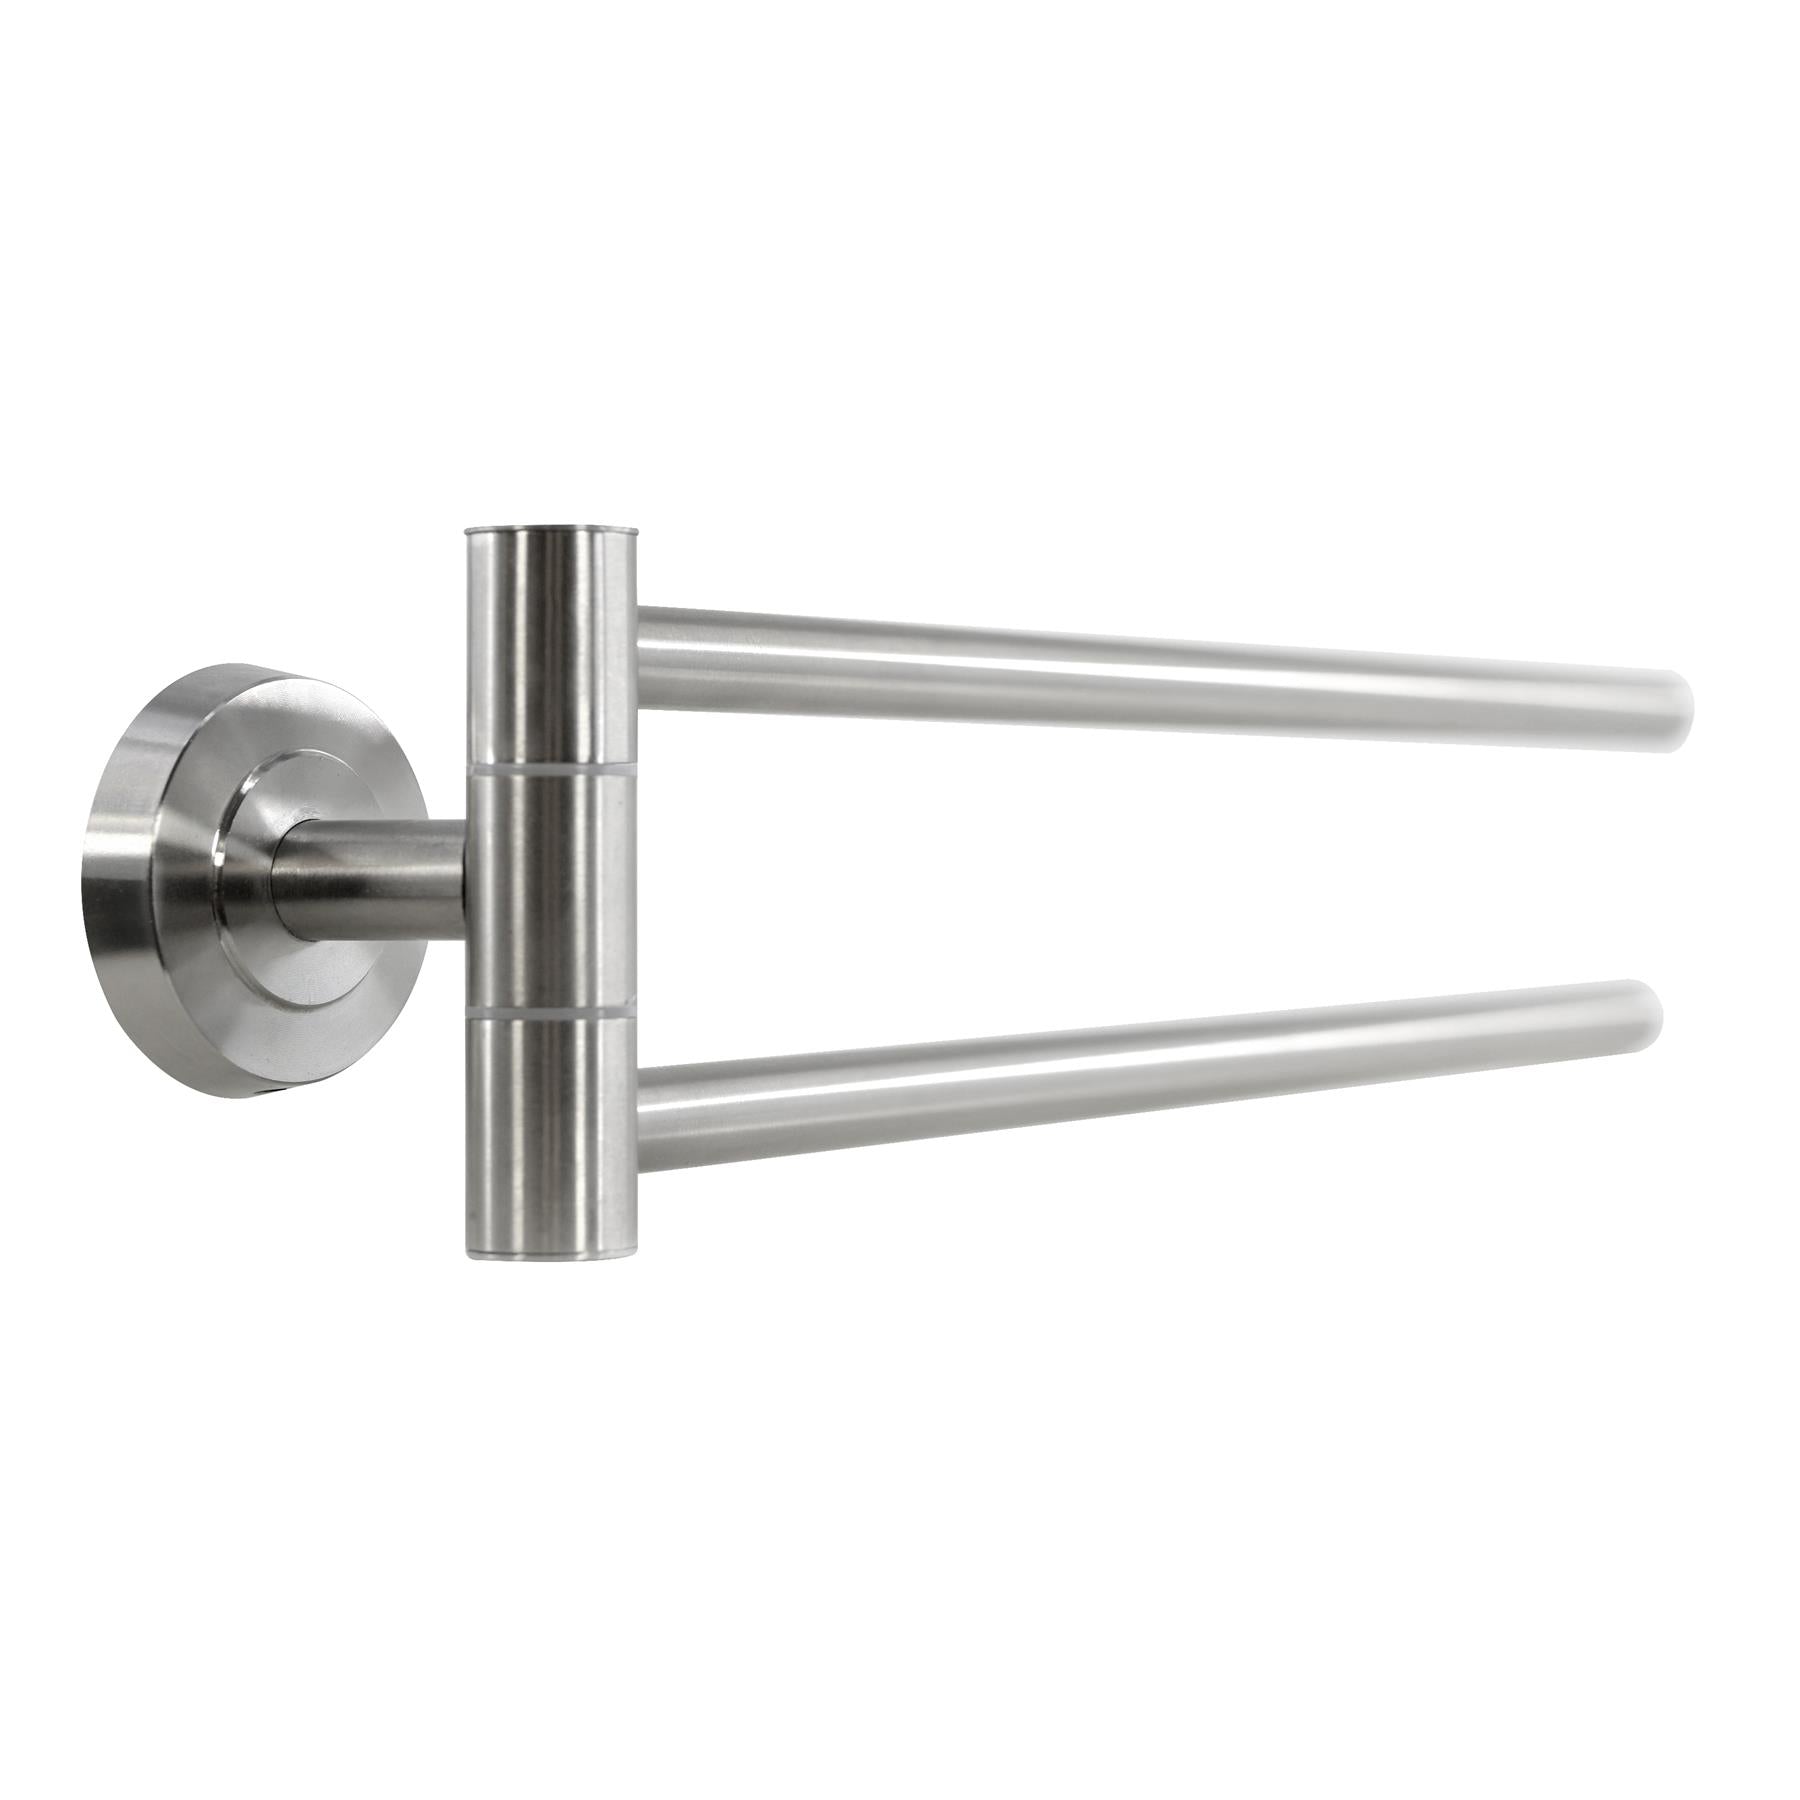 Towel Rail Double Swivel Wall Mounted 50cm by Geezy - The Magic Toy Shop